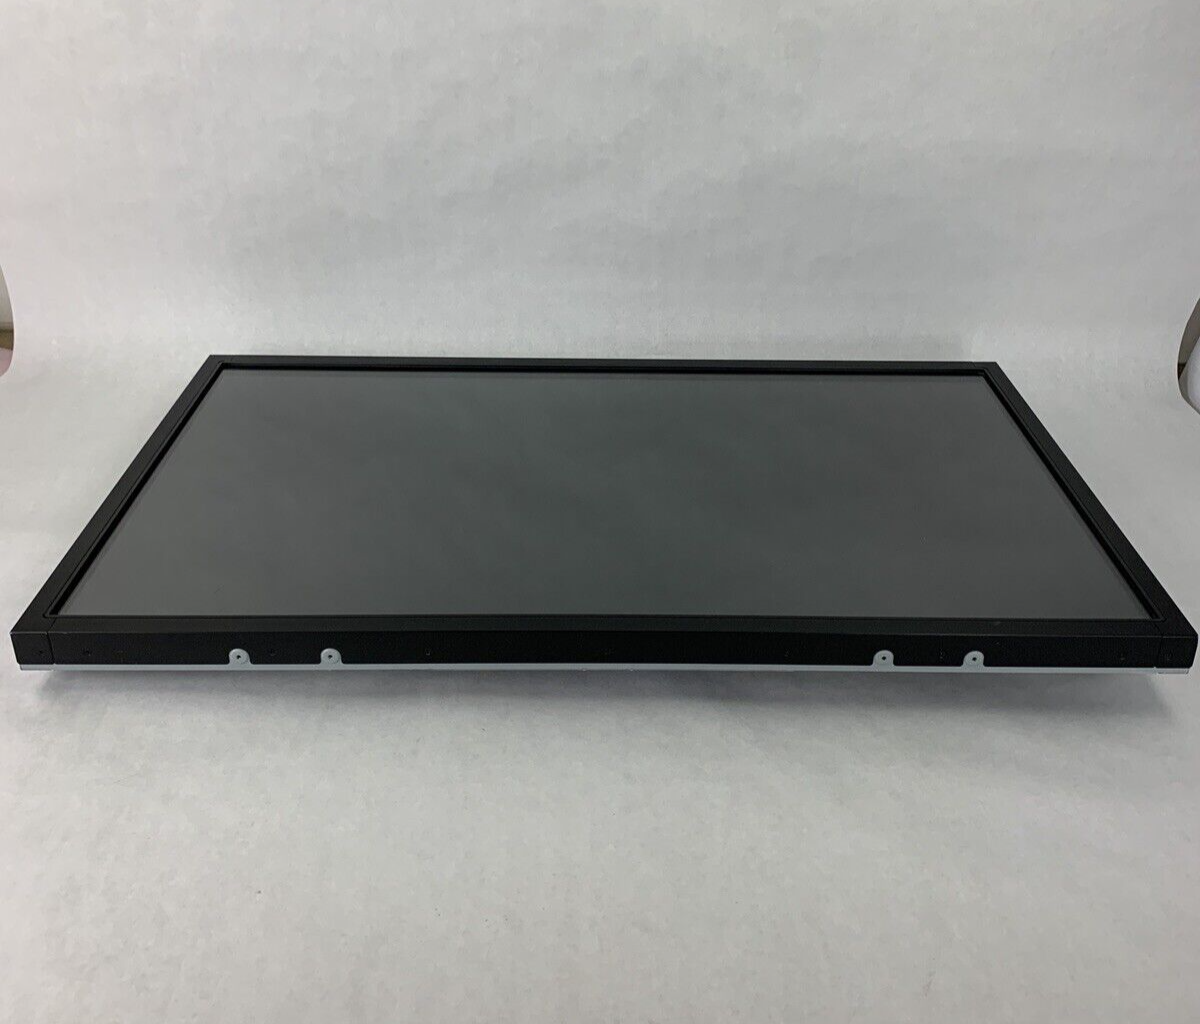 ELO ET4243L Open Frame Touchscreen ET4243L-8UWA-0-MT-D-G Working with Issue